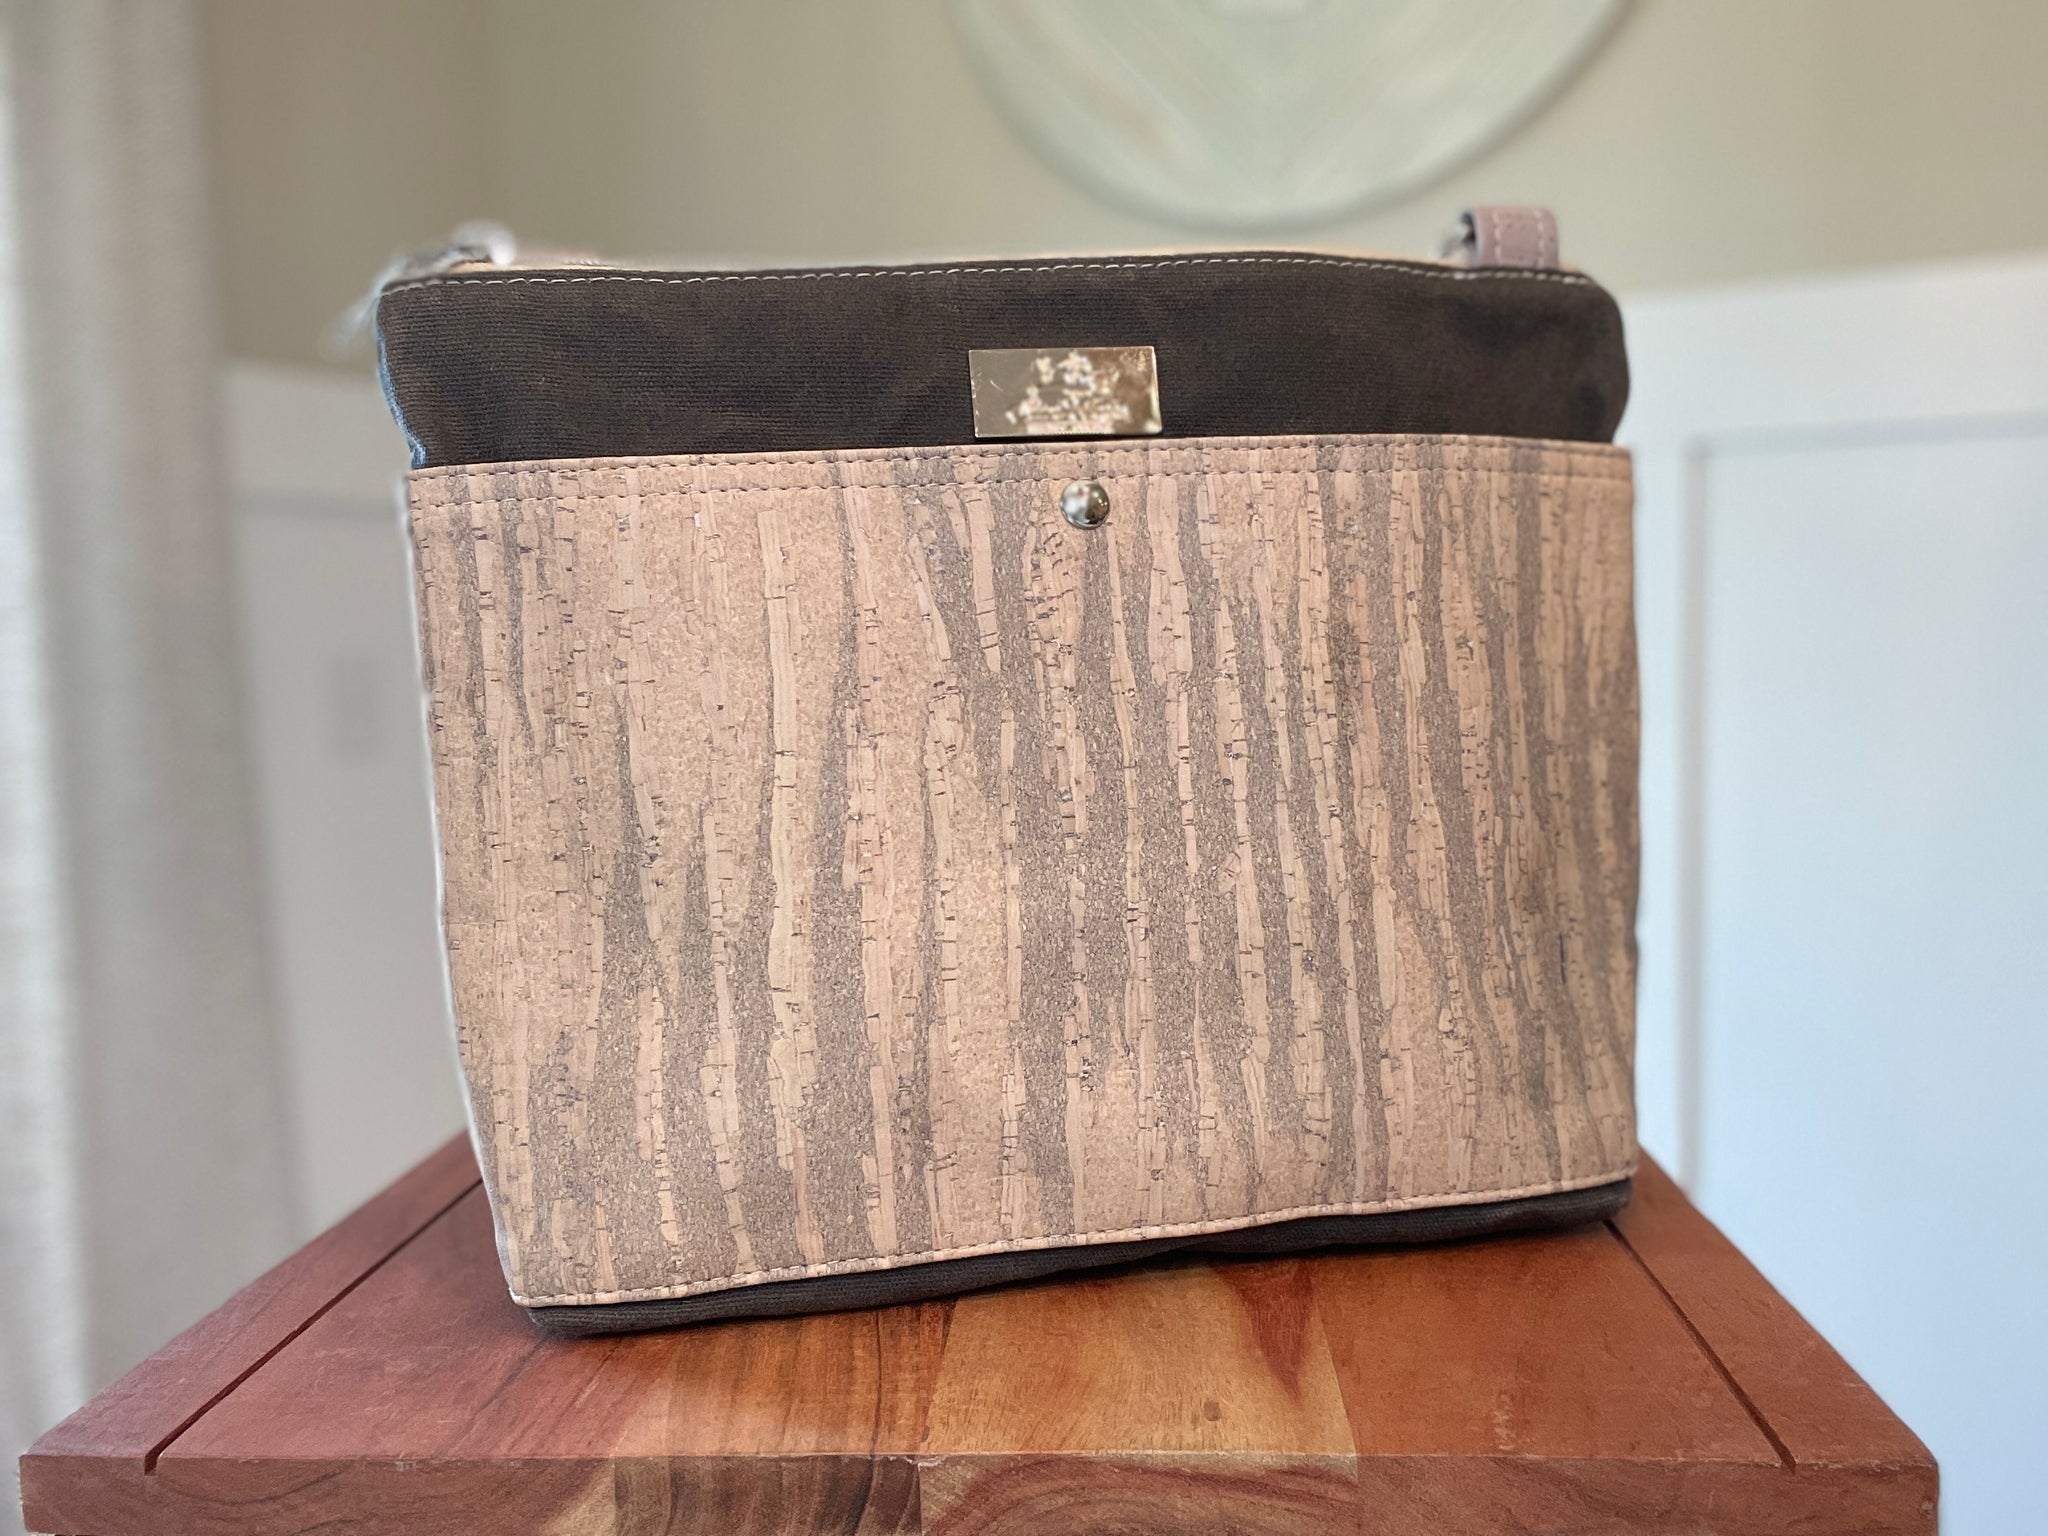 Type A Bag - Gray Waxed Canvas with Sandstone Cork Accent